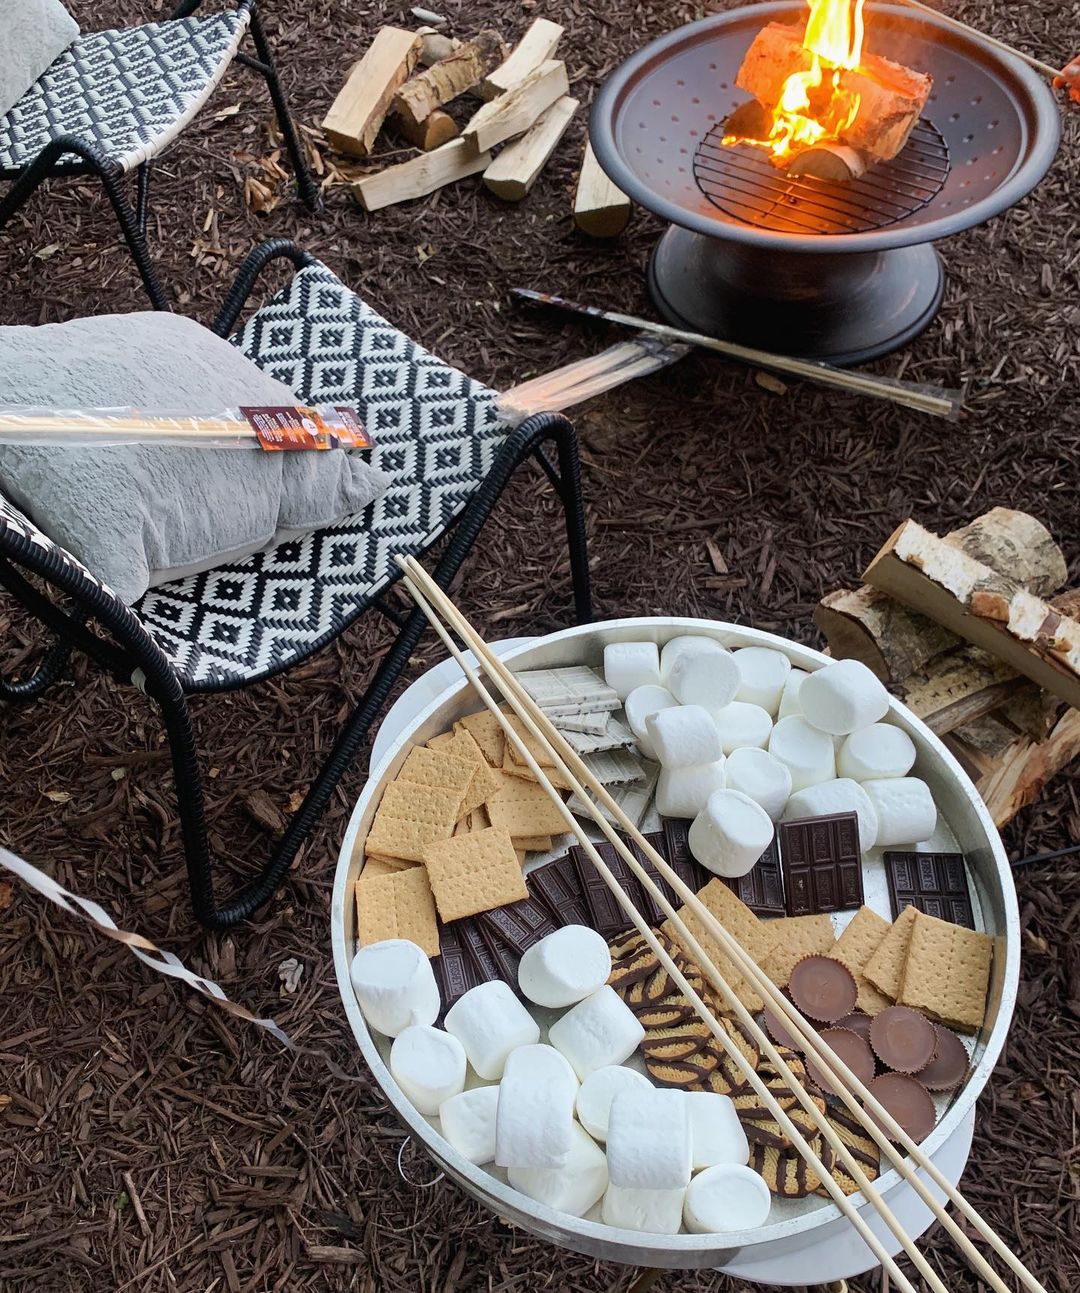 S'Mores Bar Next to a Fire Pit in a Backyard. Photo by Instagram user @marymdunn